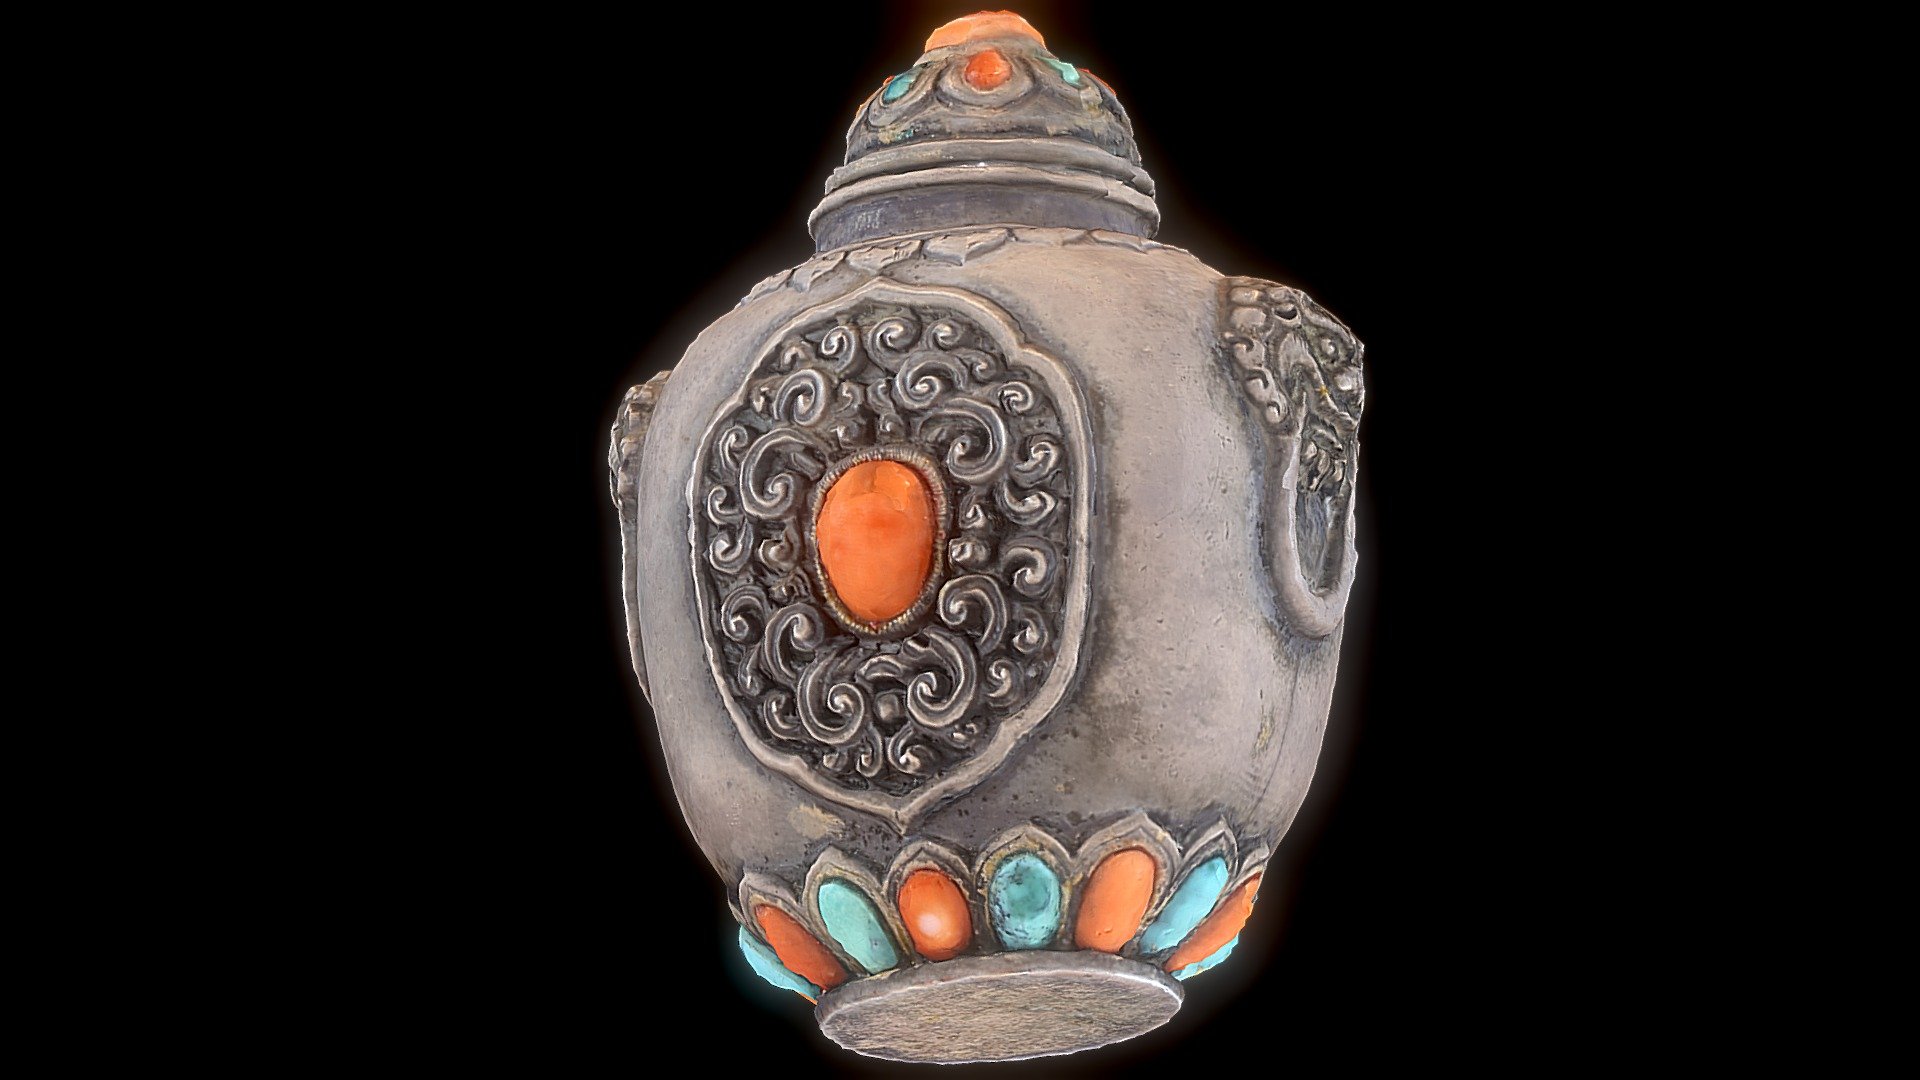 19th century silver engraved snuff bottle adorned with jade and coral stones.

Created in RealityCapture by Capturing Reality from 190 images in 00h:31m:57s 3d model